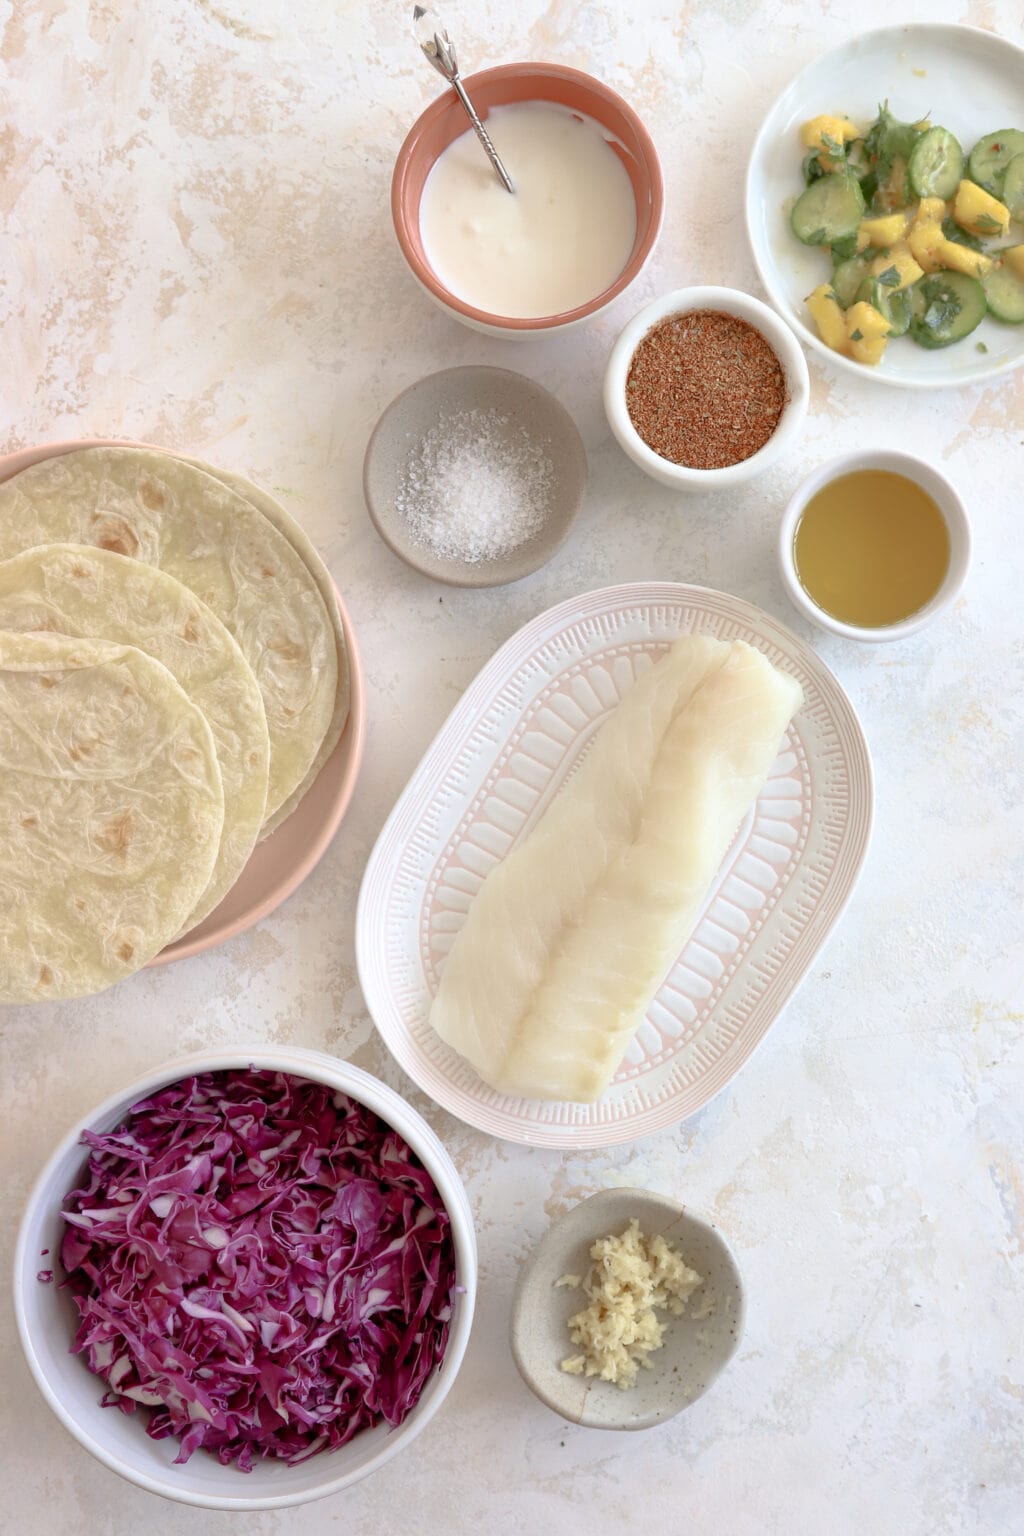 Ingredients to make fish tacos placed in bowls and on plates. Ingredients include mango and cucumber salad, lime crema, cajun spice, oil, salt, tortillas, white fish, shredded cabbage, and garlic.